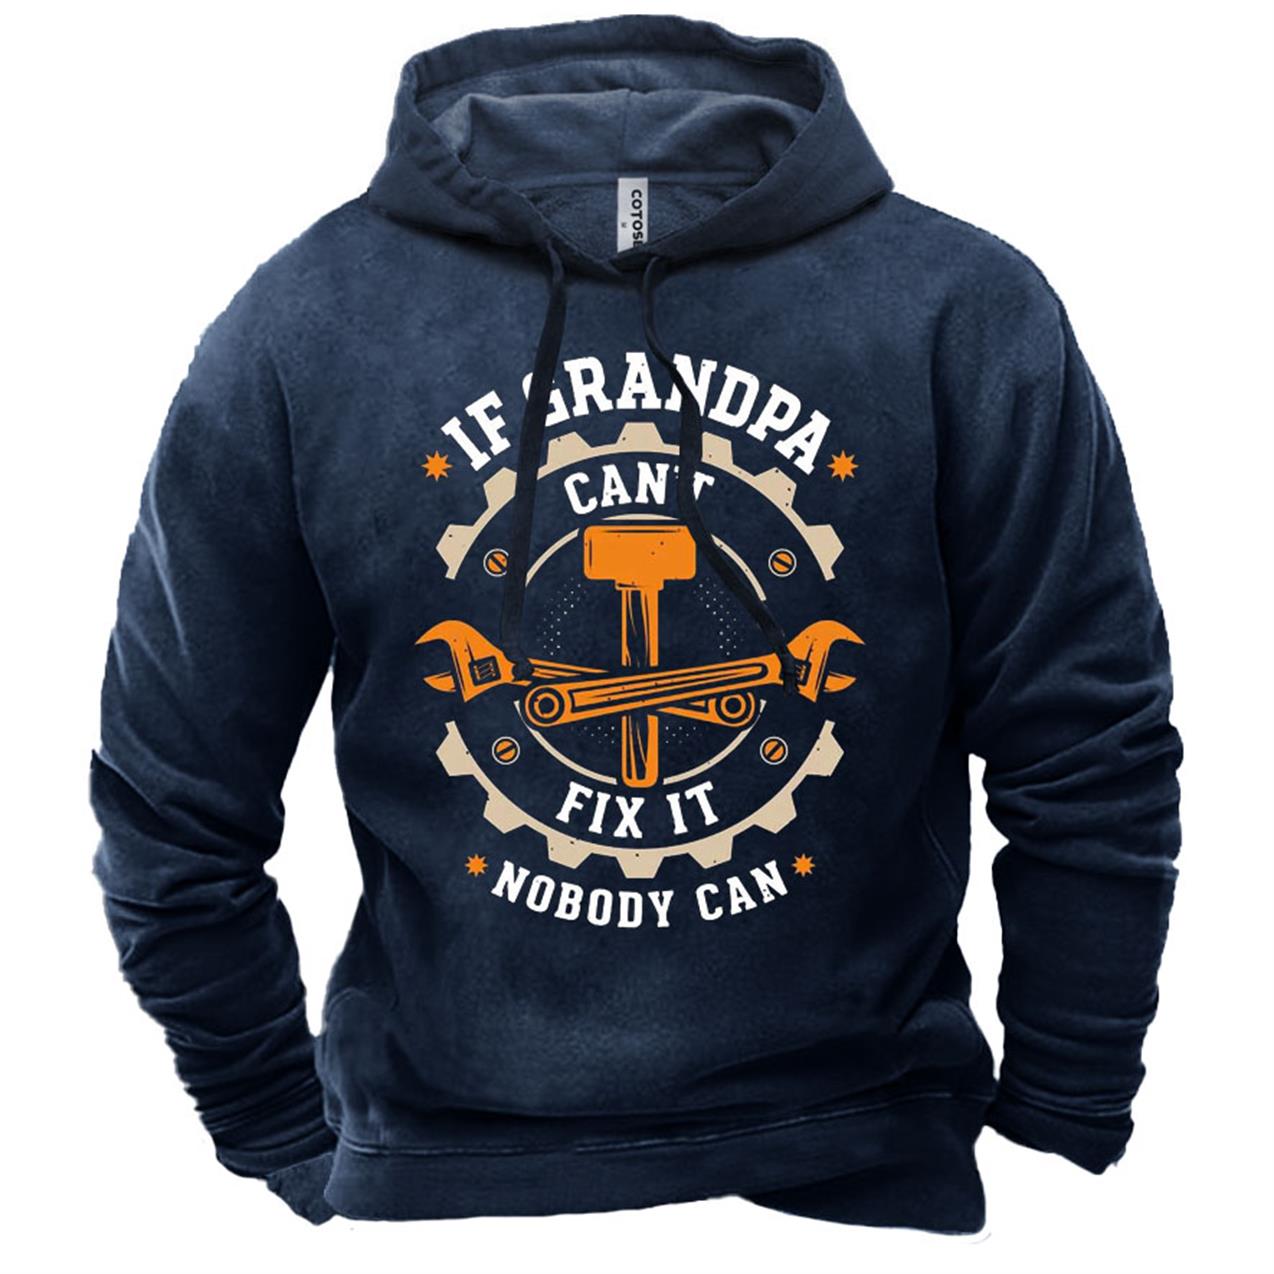 Men's If Grandpa Can't Chic Fix It Nobody Can Print Hoodie